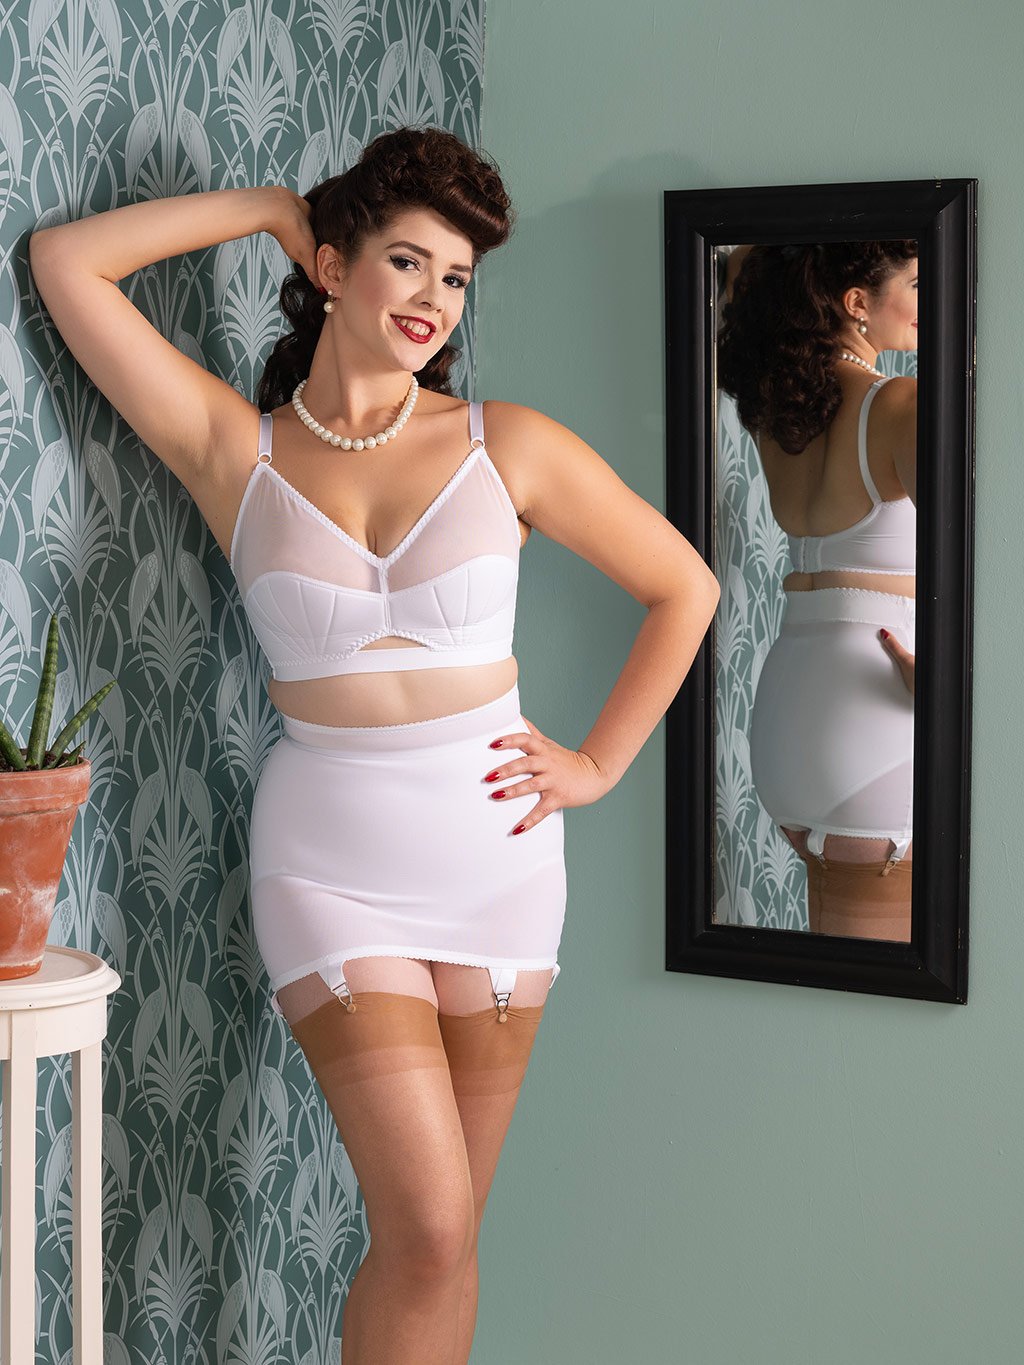 White High Waist Lace Up Front Open Bottom Girdle White Bra and